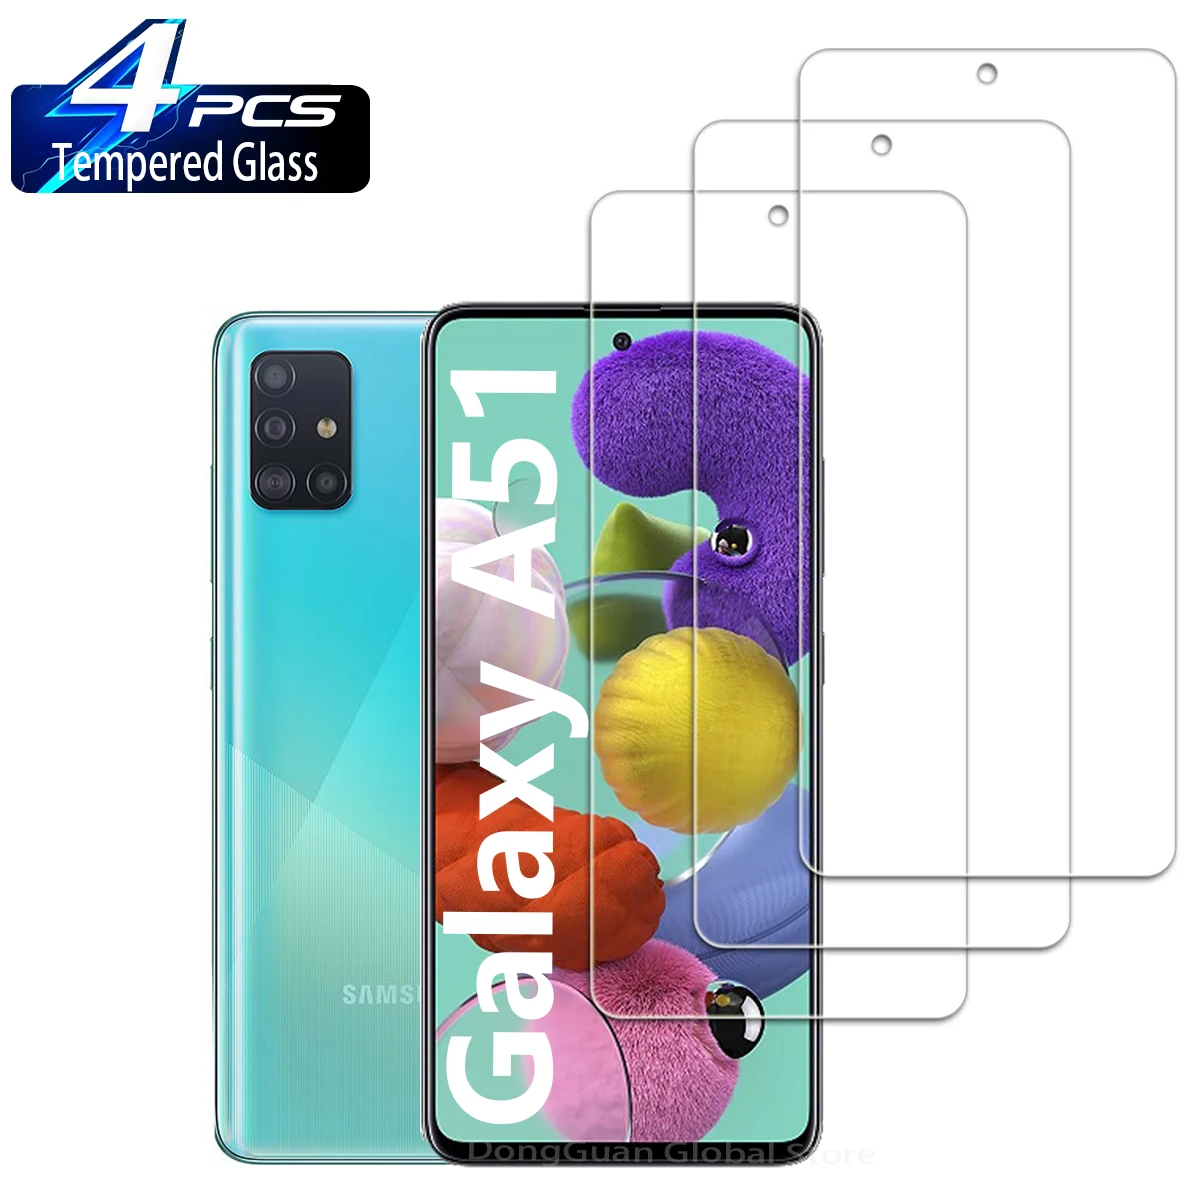 2/4Pcs Tempered Glass For Samsung Galaxy A51 Screen Protector Glass Film 9h protective glass on for samsung galaxy a01 a11 a21 a31 a41 a51 a71 tempered glass samsung m11 m21 m31 m51 m10s screen film